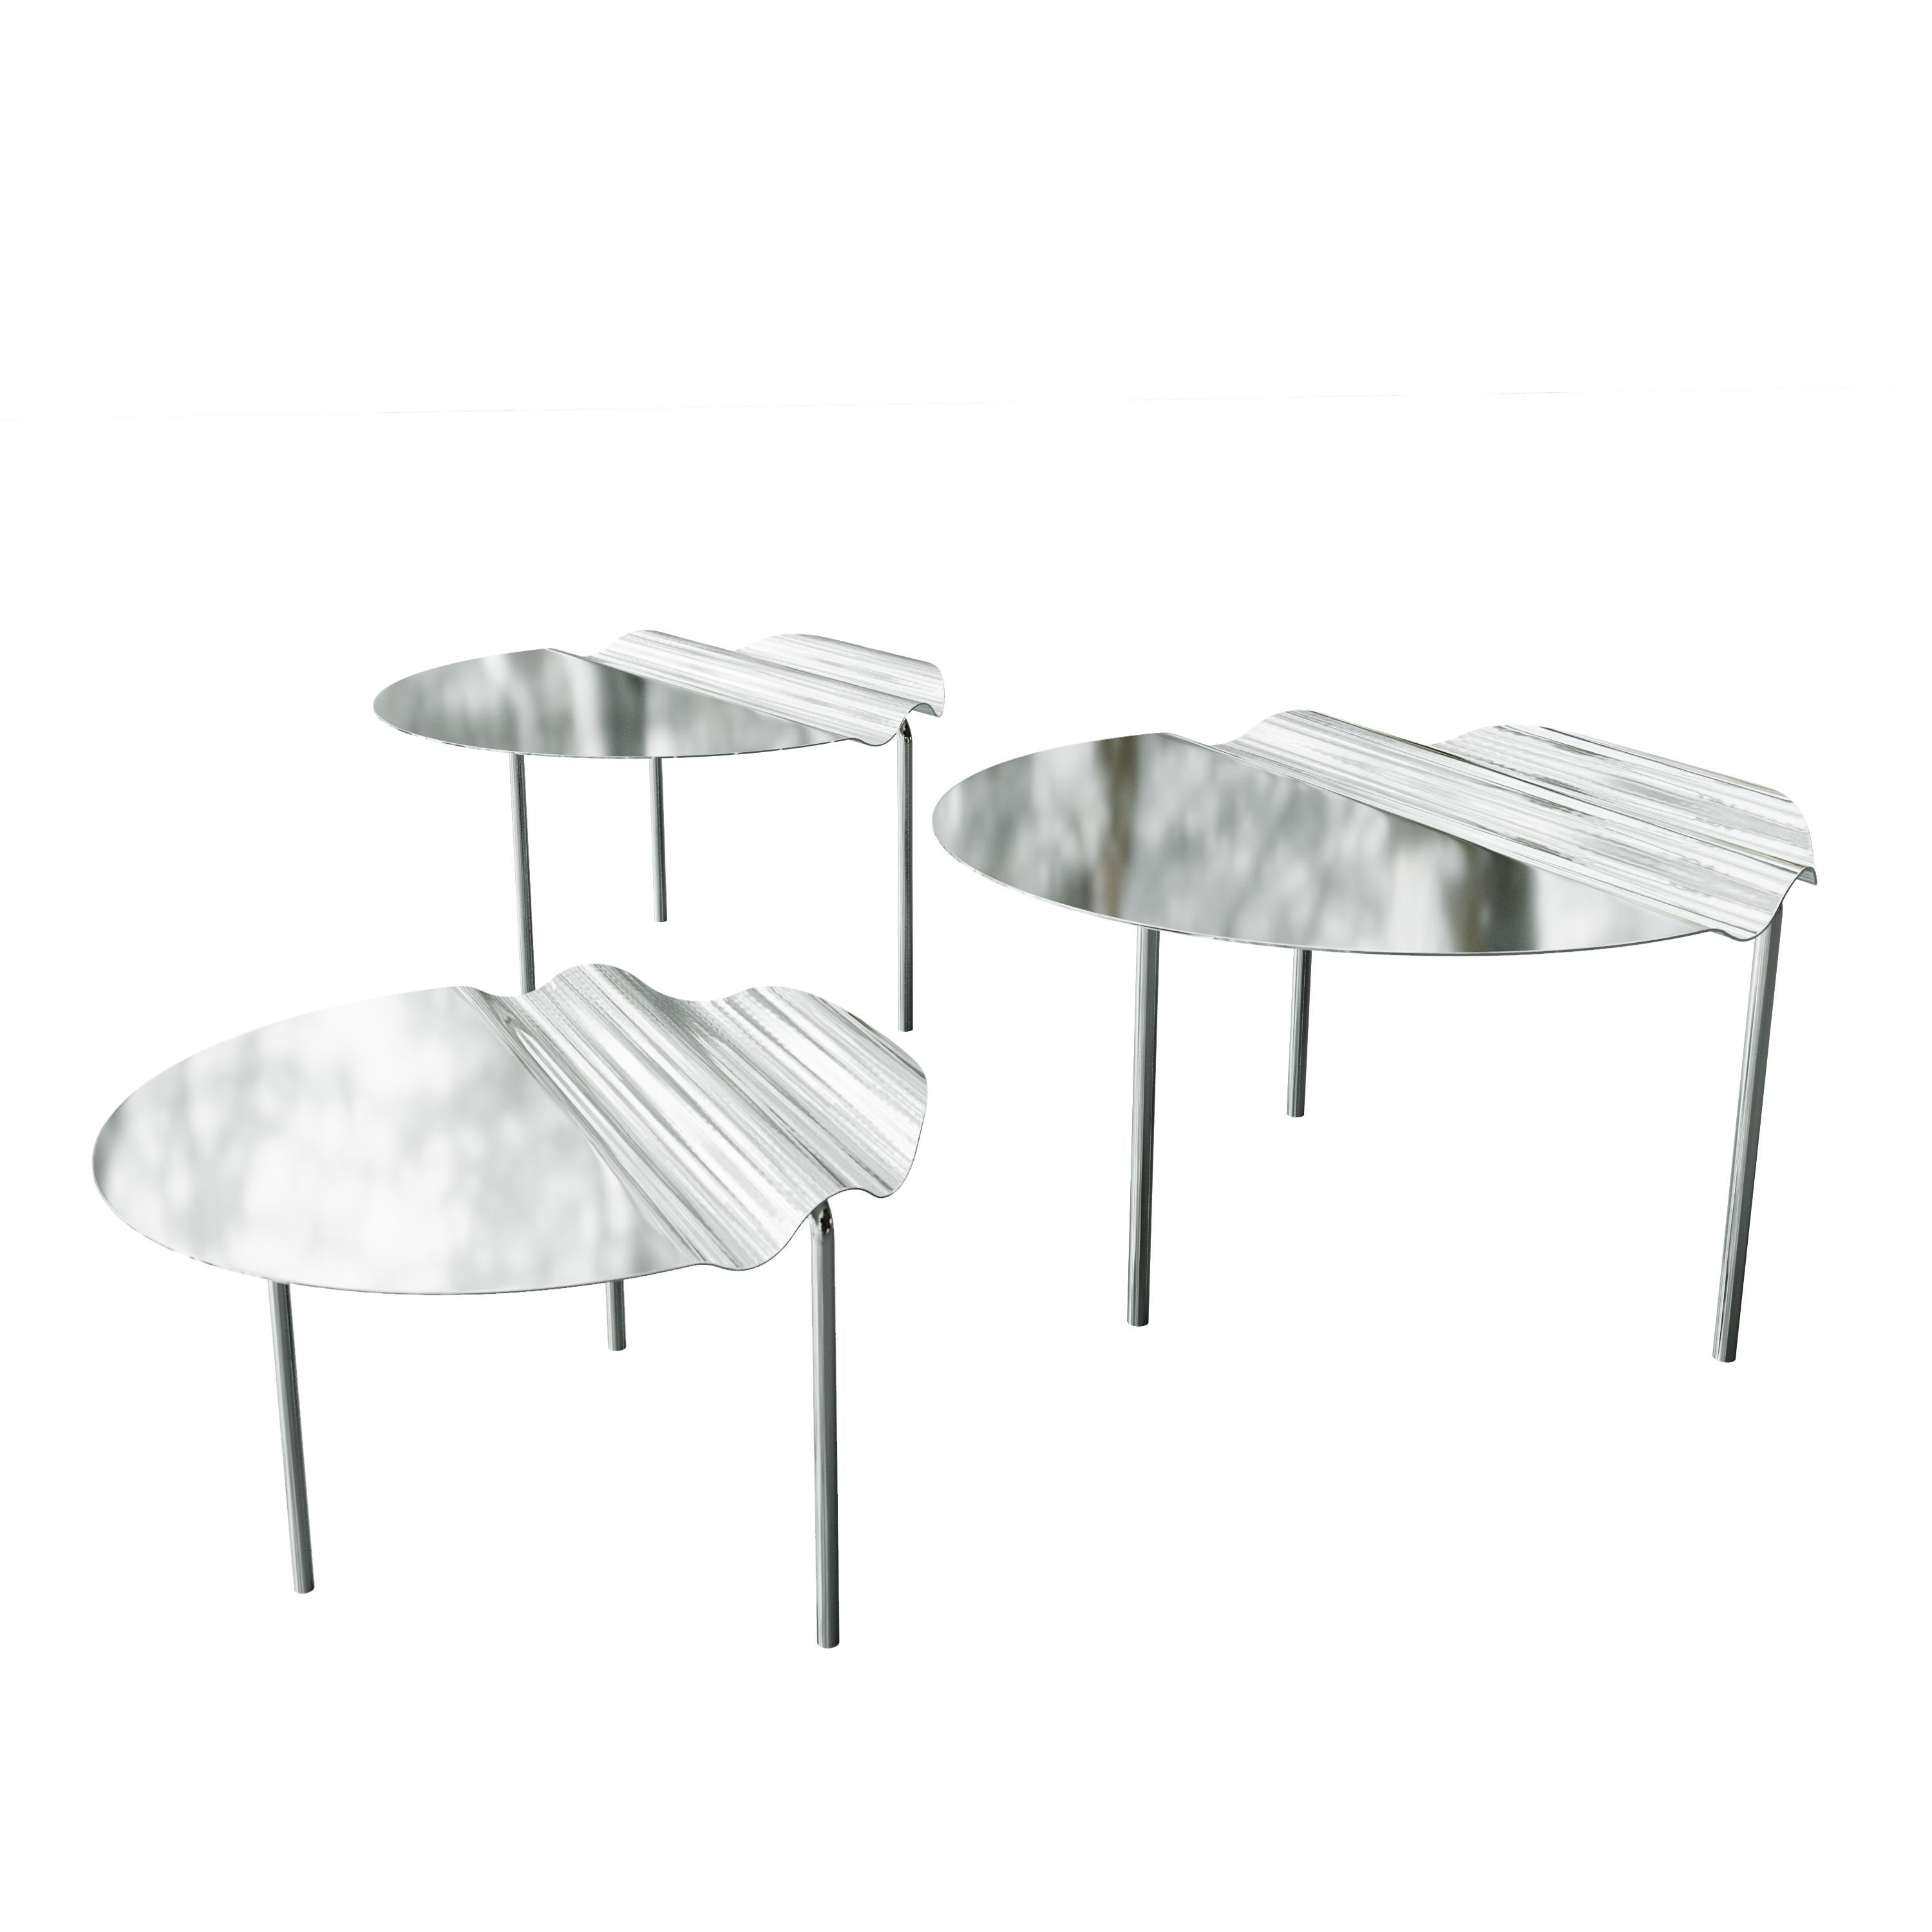 Set of Three Modern Low Tables Mount Made of Stainless Steel by DALI HOME For Sale 6